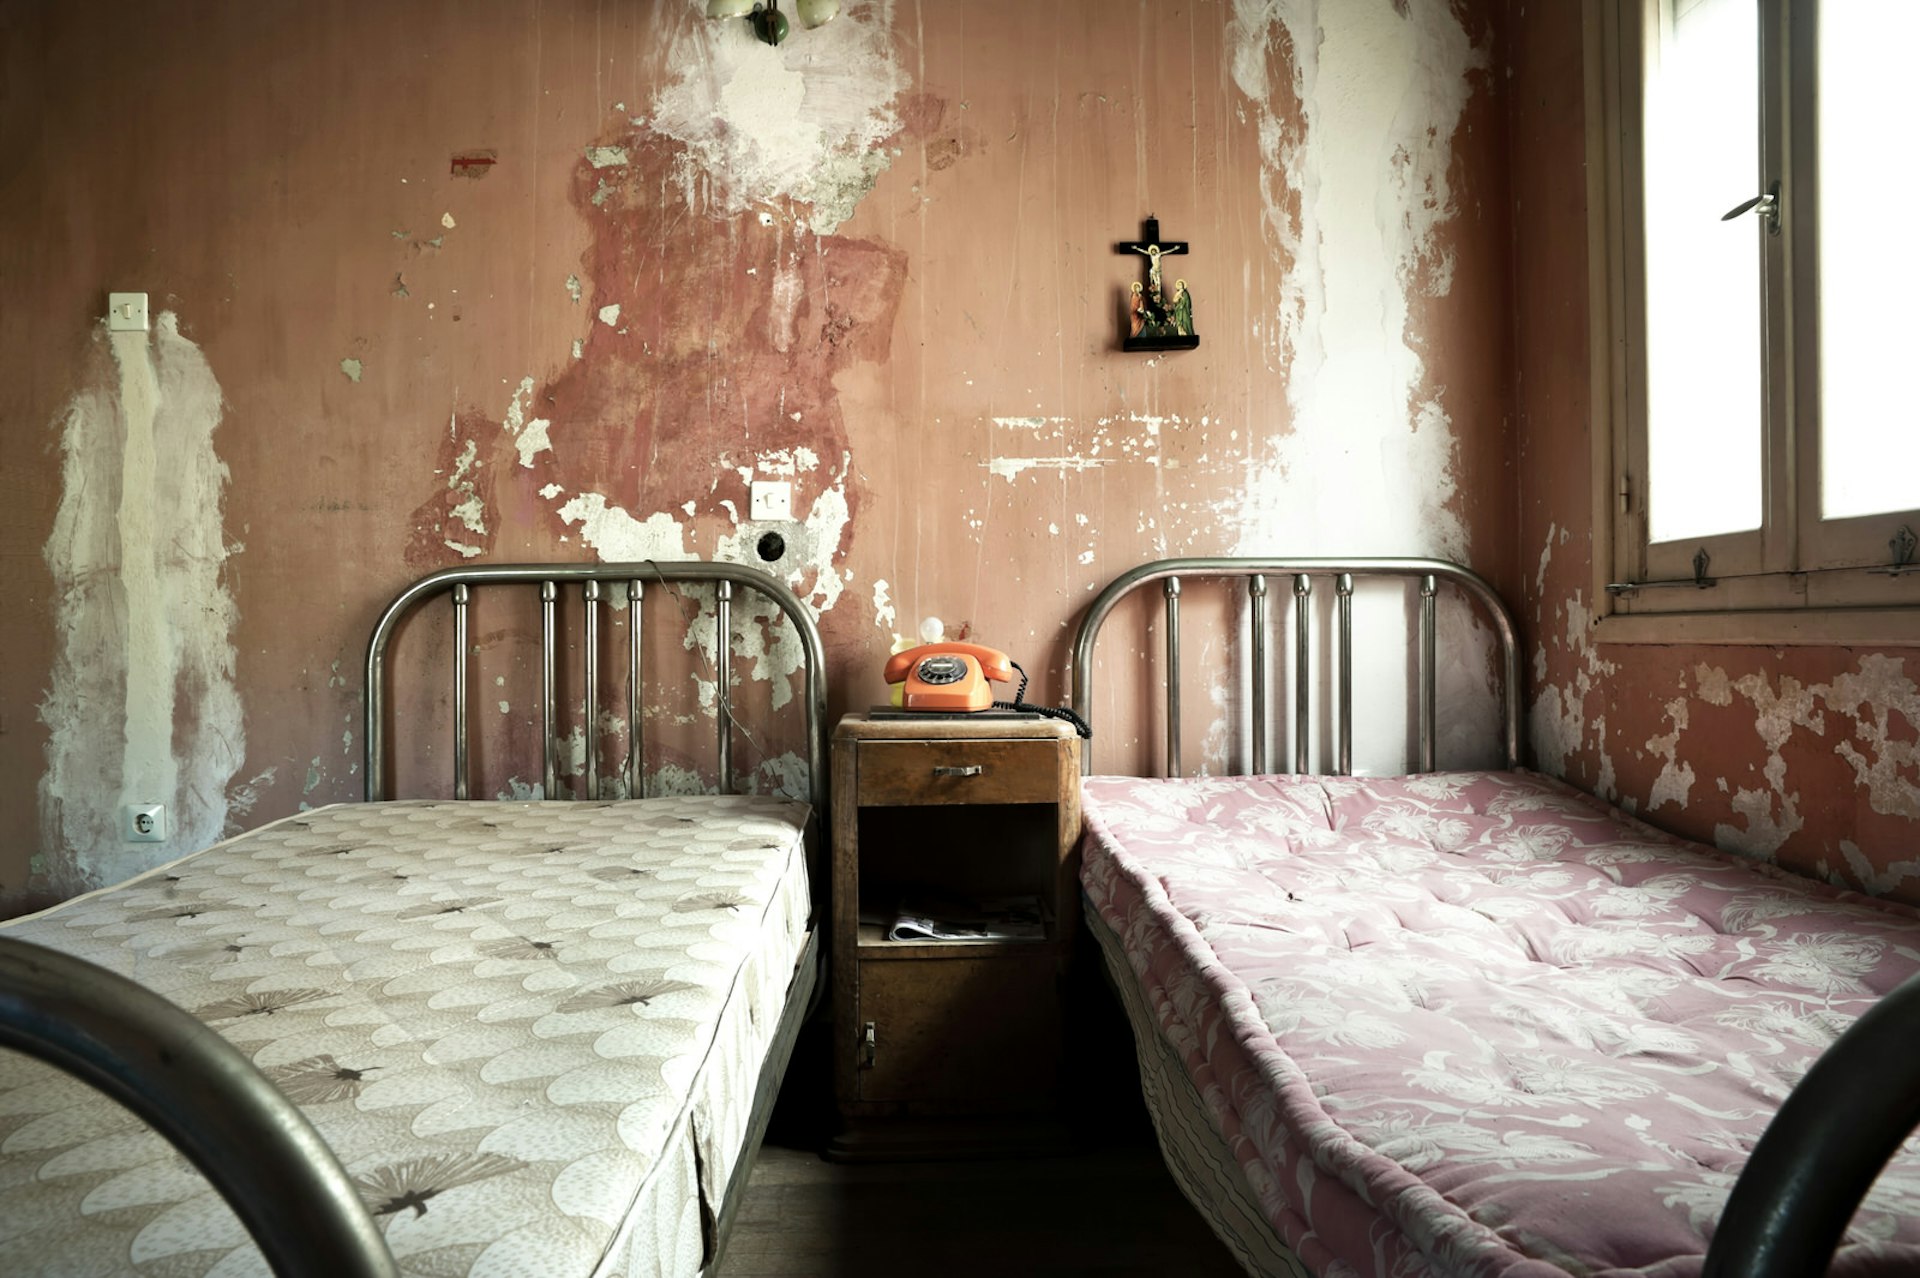 A dirty hotel room with unmade beds and bare walls © Antlio / Shutterstock